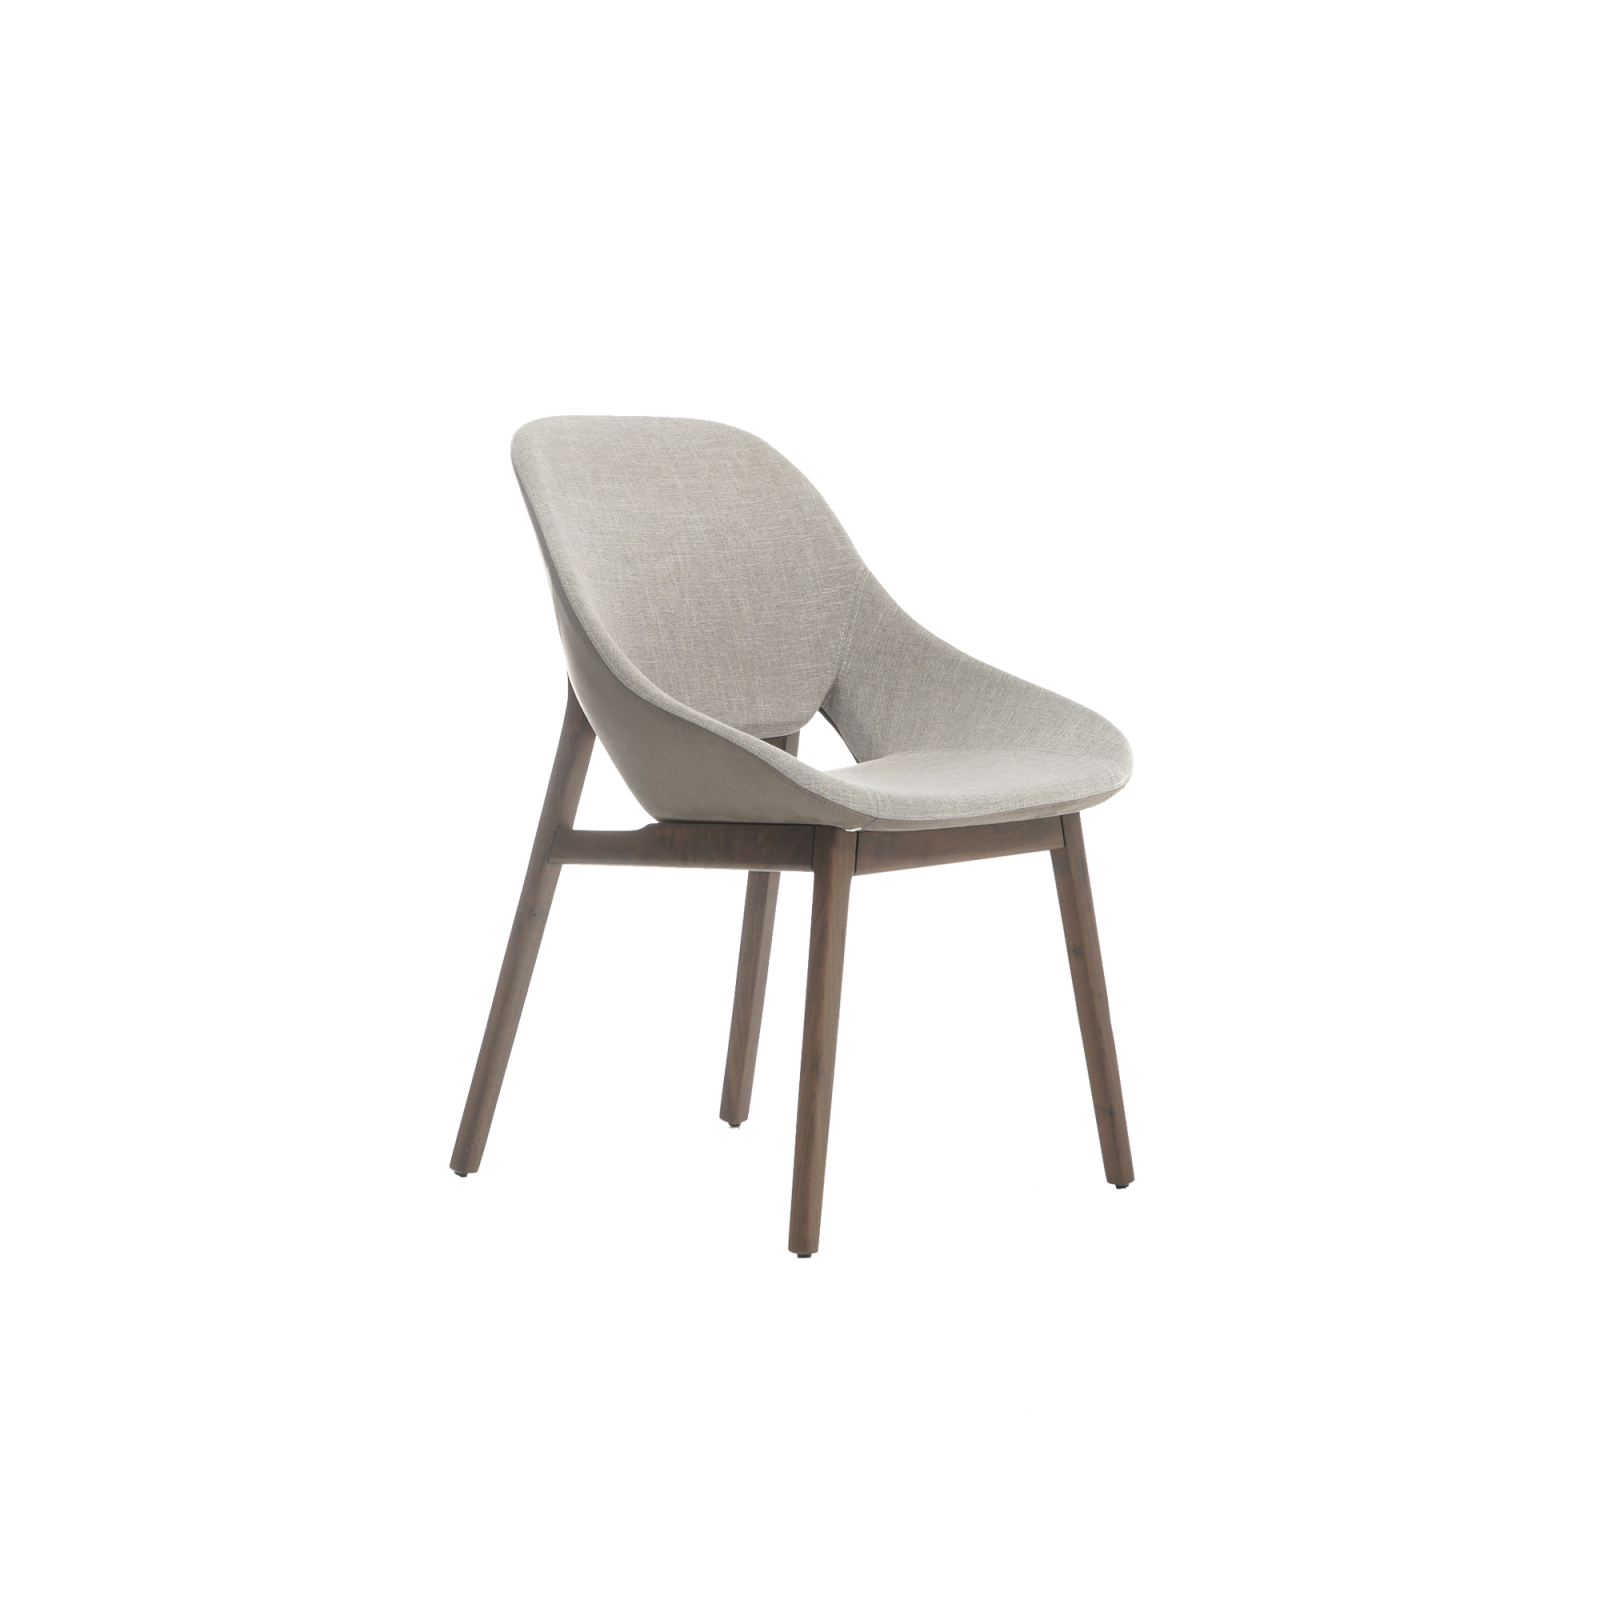 grace chair with wooden legs, oval and curved lines